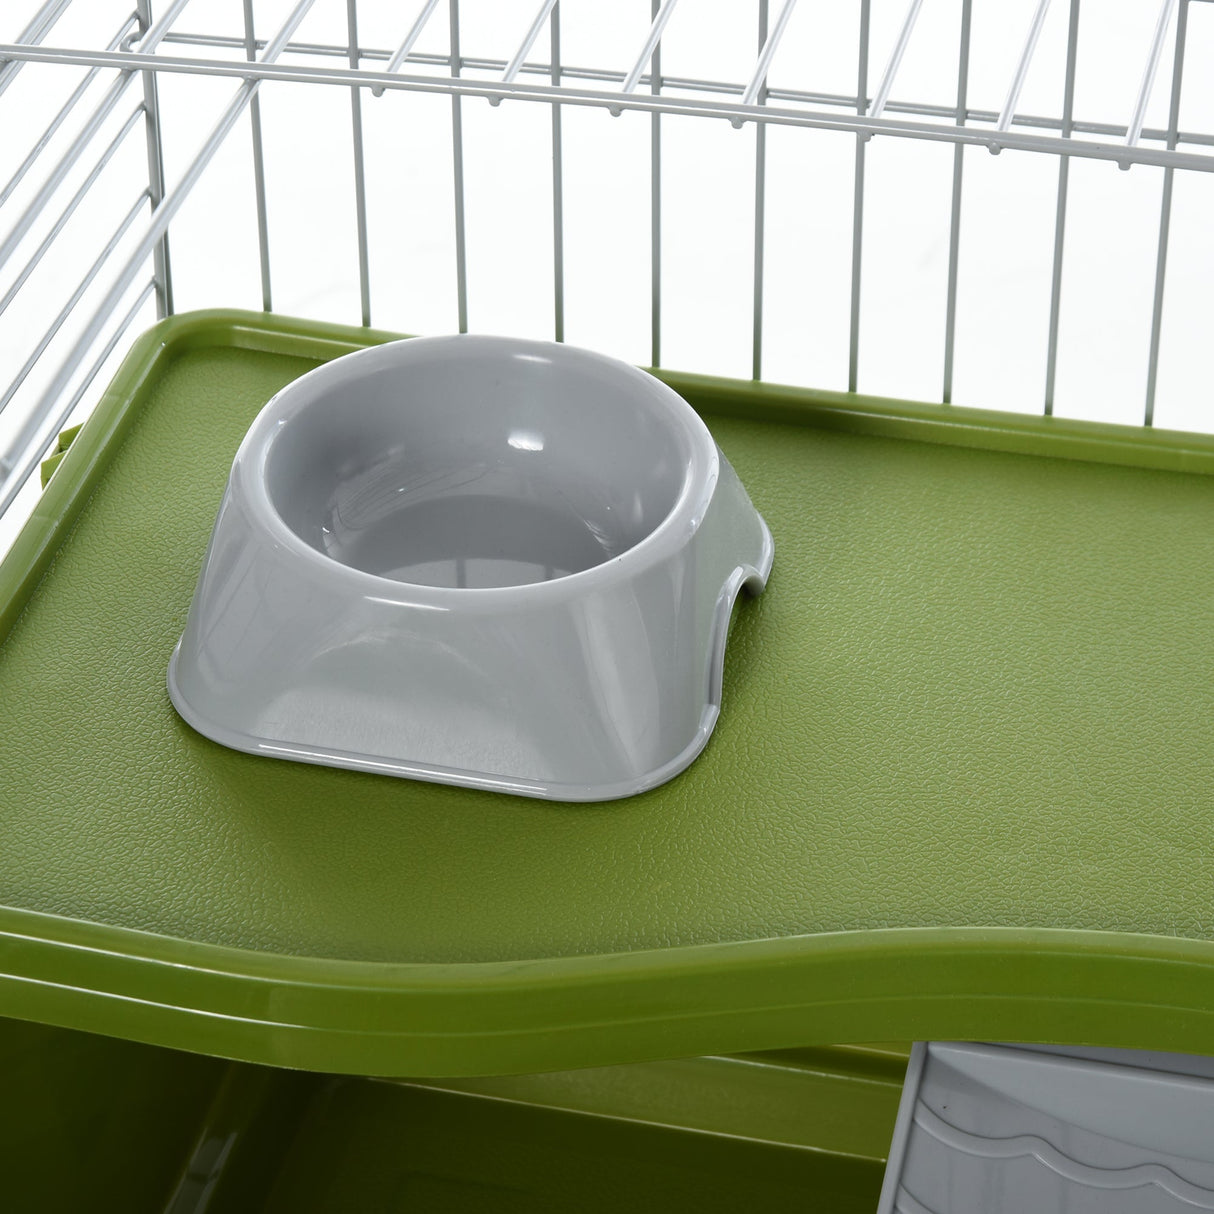 Mobile Small Animal Cage - Ideal for Small Rabbits, Guinea Pigs, PawHut, Green